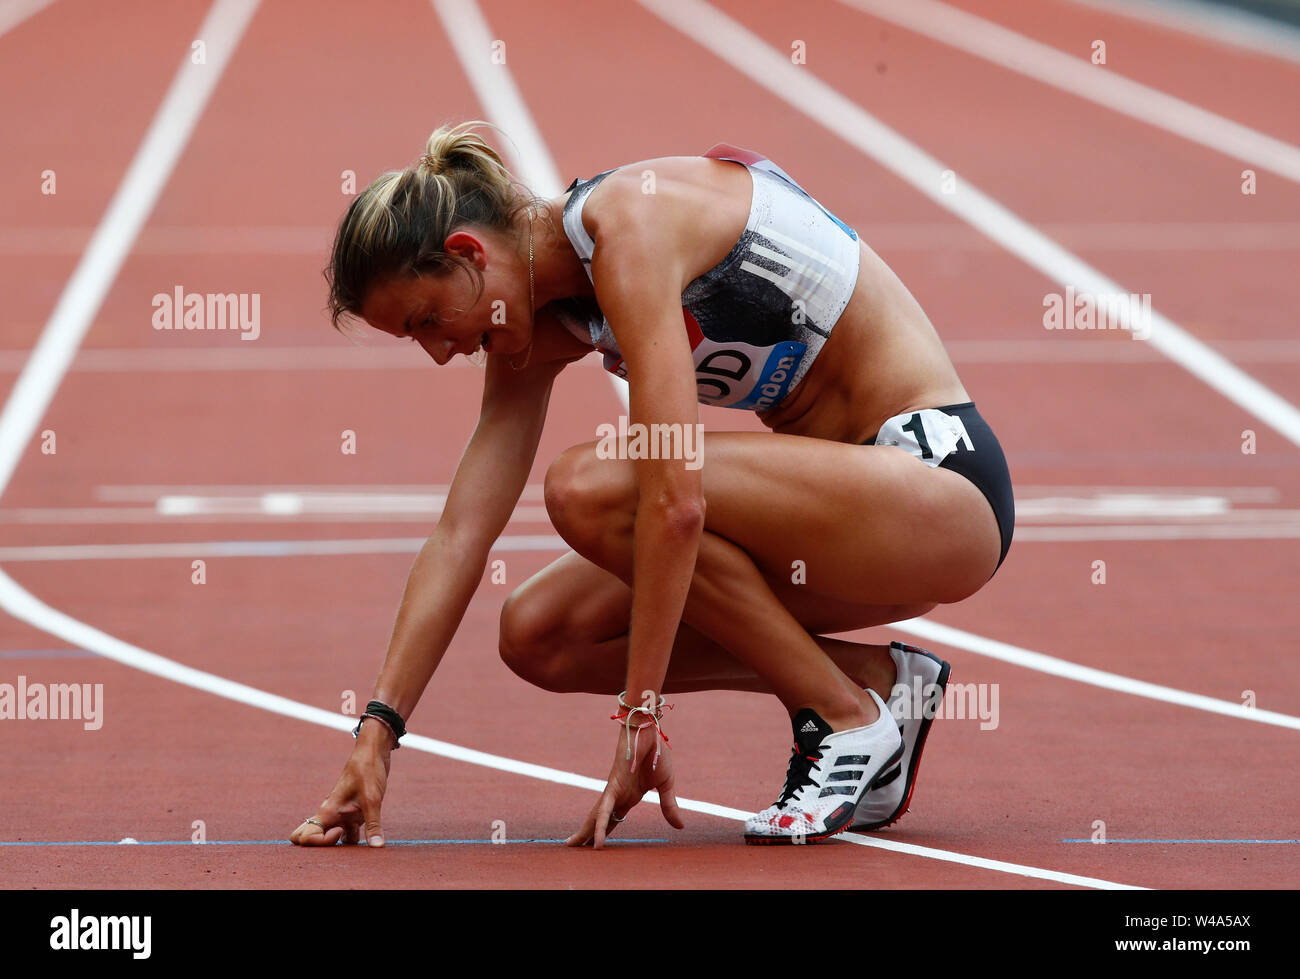 London, UK. 21st July, 2019. LONDON, ENGLAND. JULY 21: Jessica Judd (GBR) NOT TO WELL AFTER 5000M wOMEN during Day Two of IAAF Diamond League the Muller Anniversary Games at London Stadium on July 20, 2019 in London, England. Credit: Action Foto Sport/Alamy Live News Stock Photo